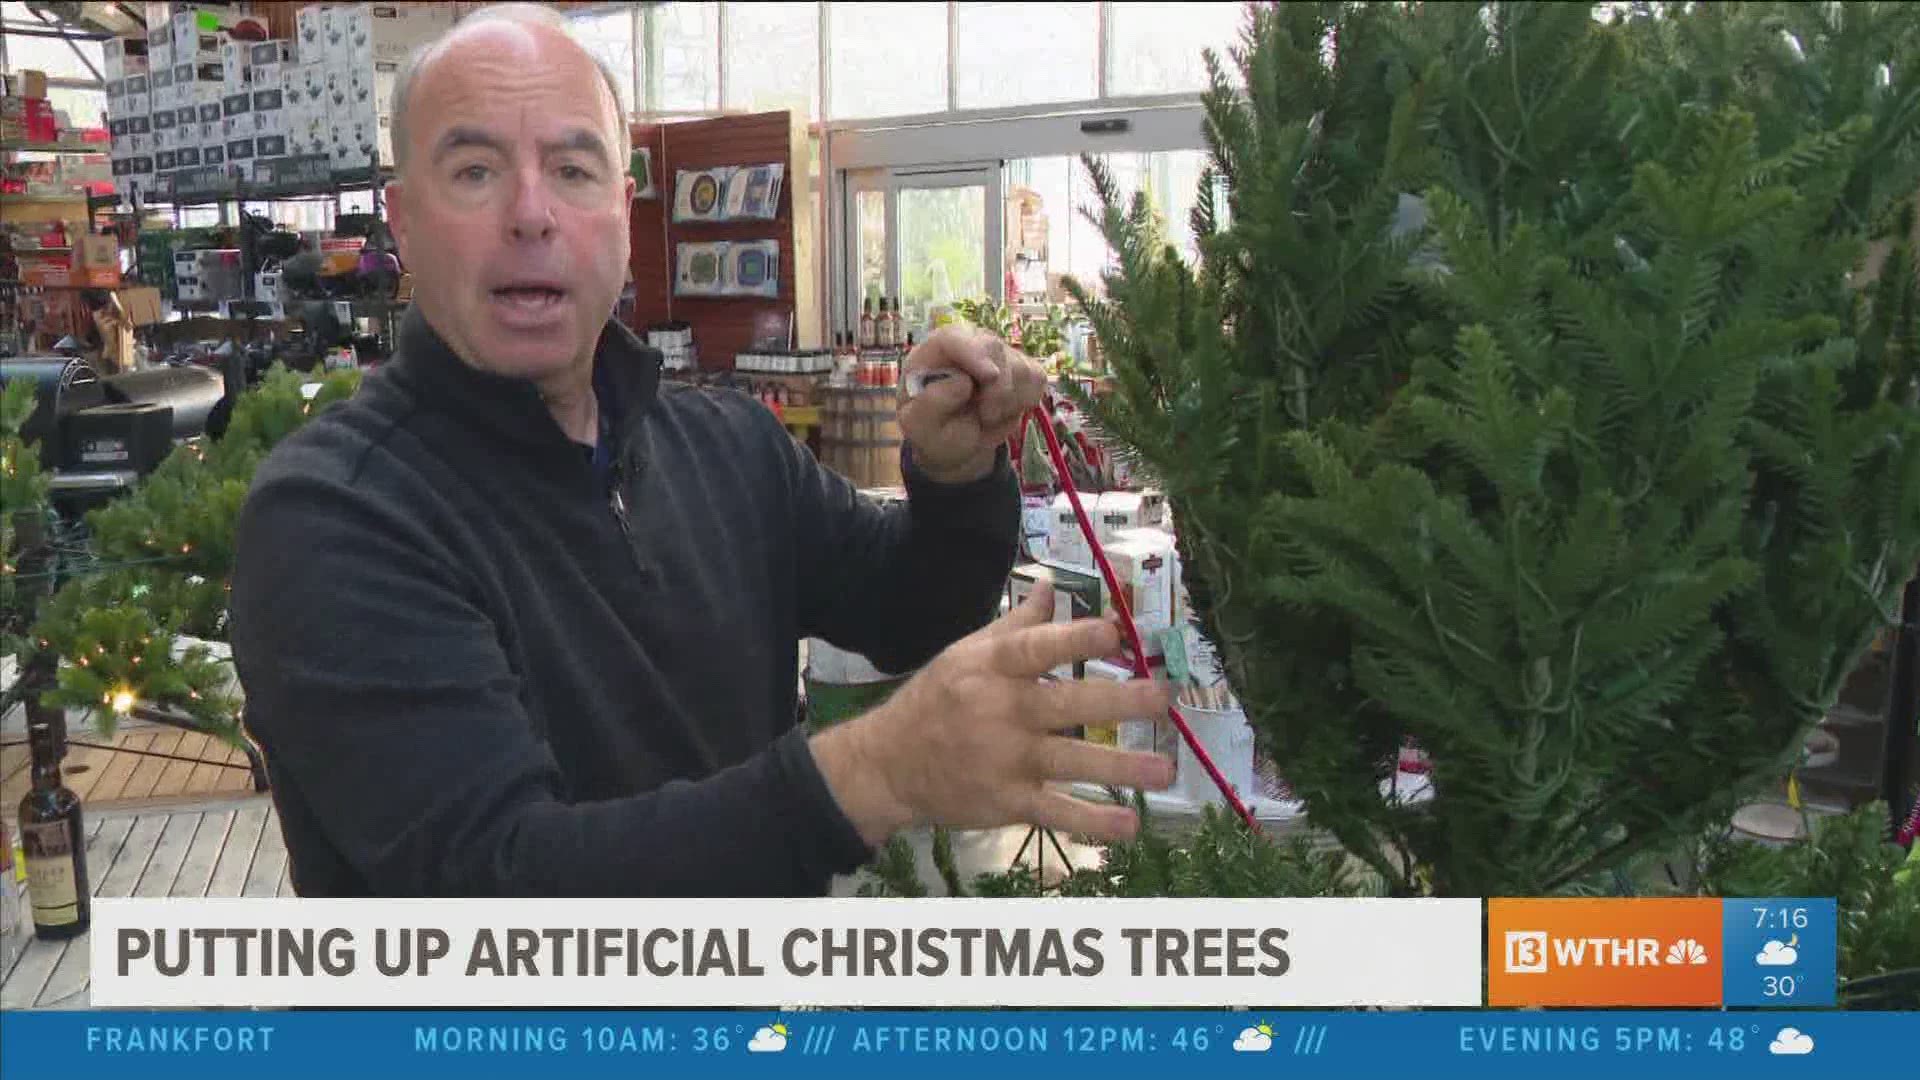 If you are buying or unpacking your artificial Christmas tree, Pat shows you how to make it look great when you set it up.